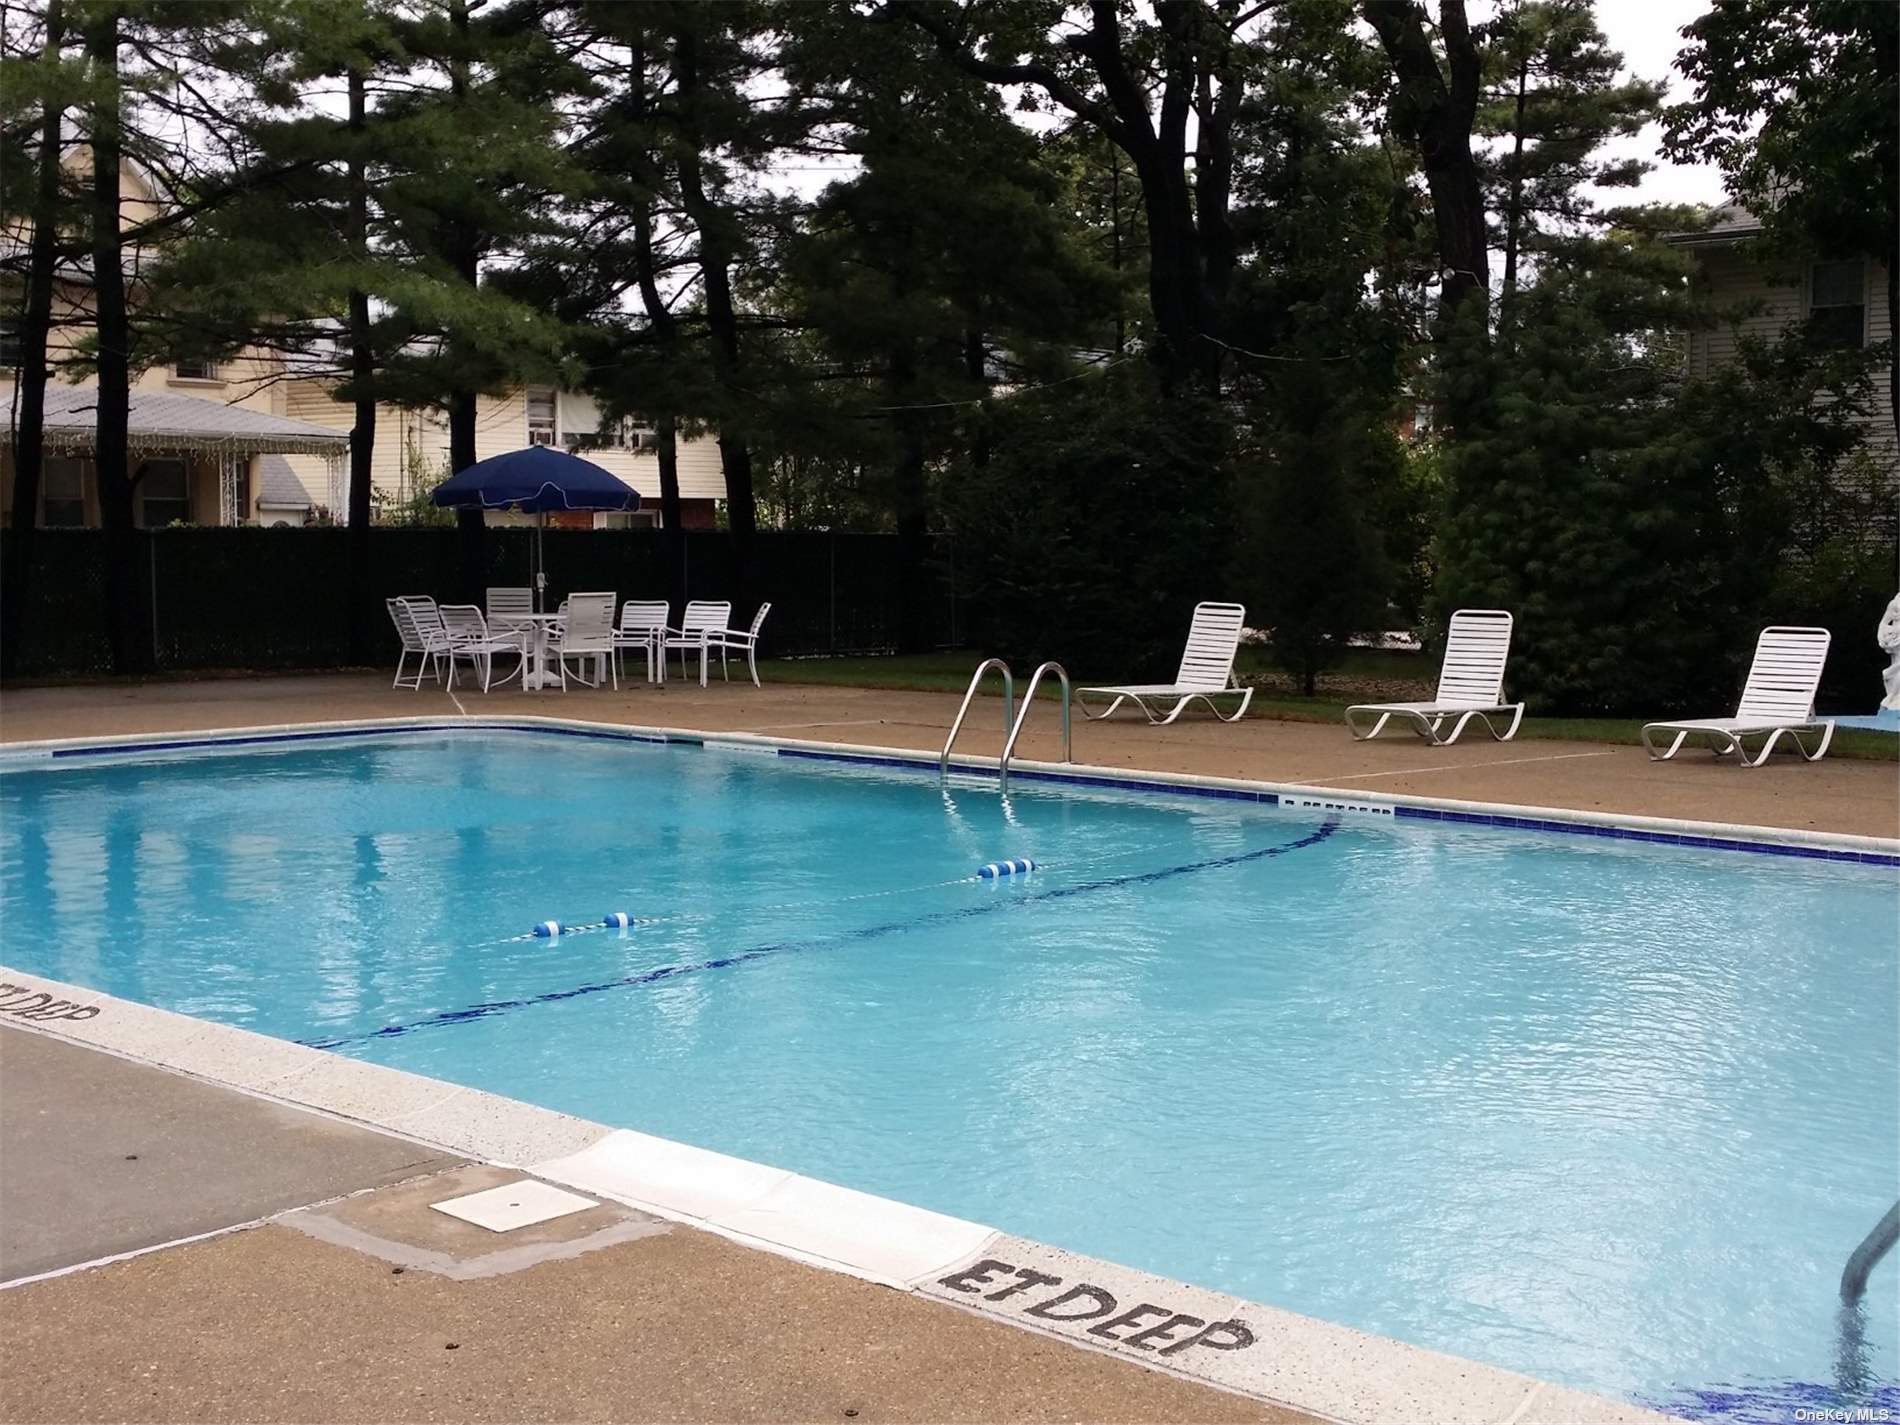 a view of a swimming pool with lounge chairs